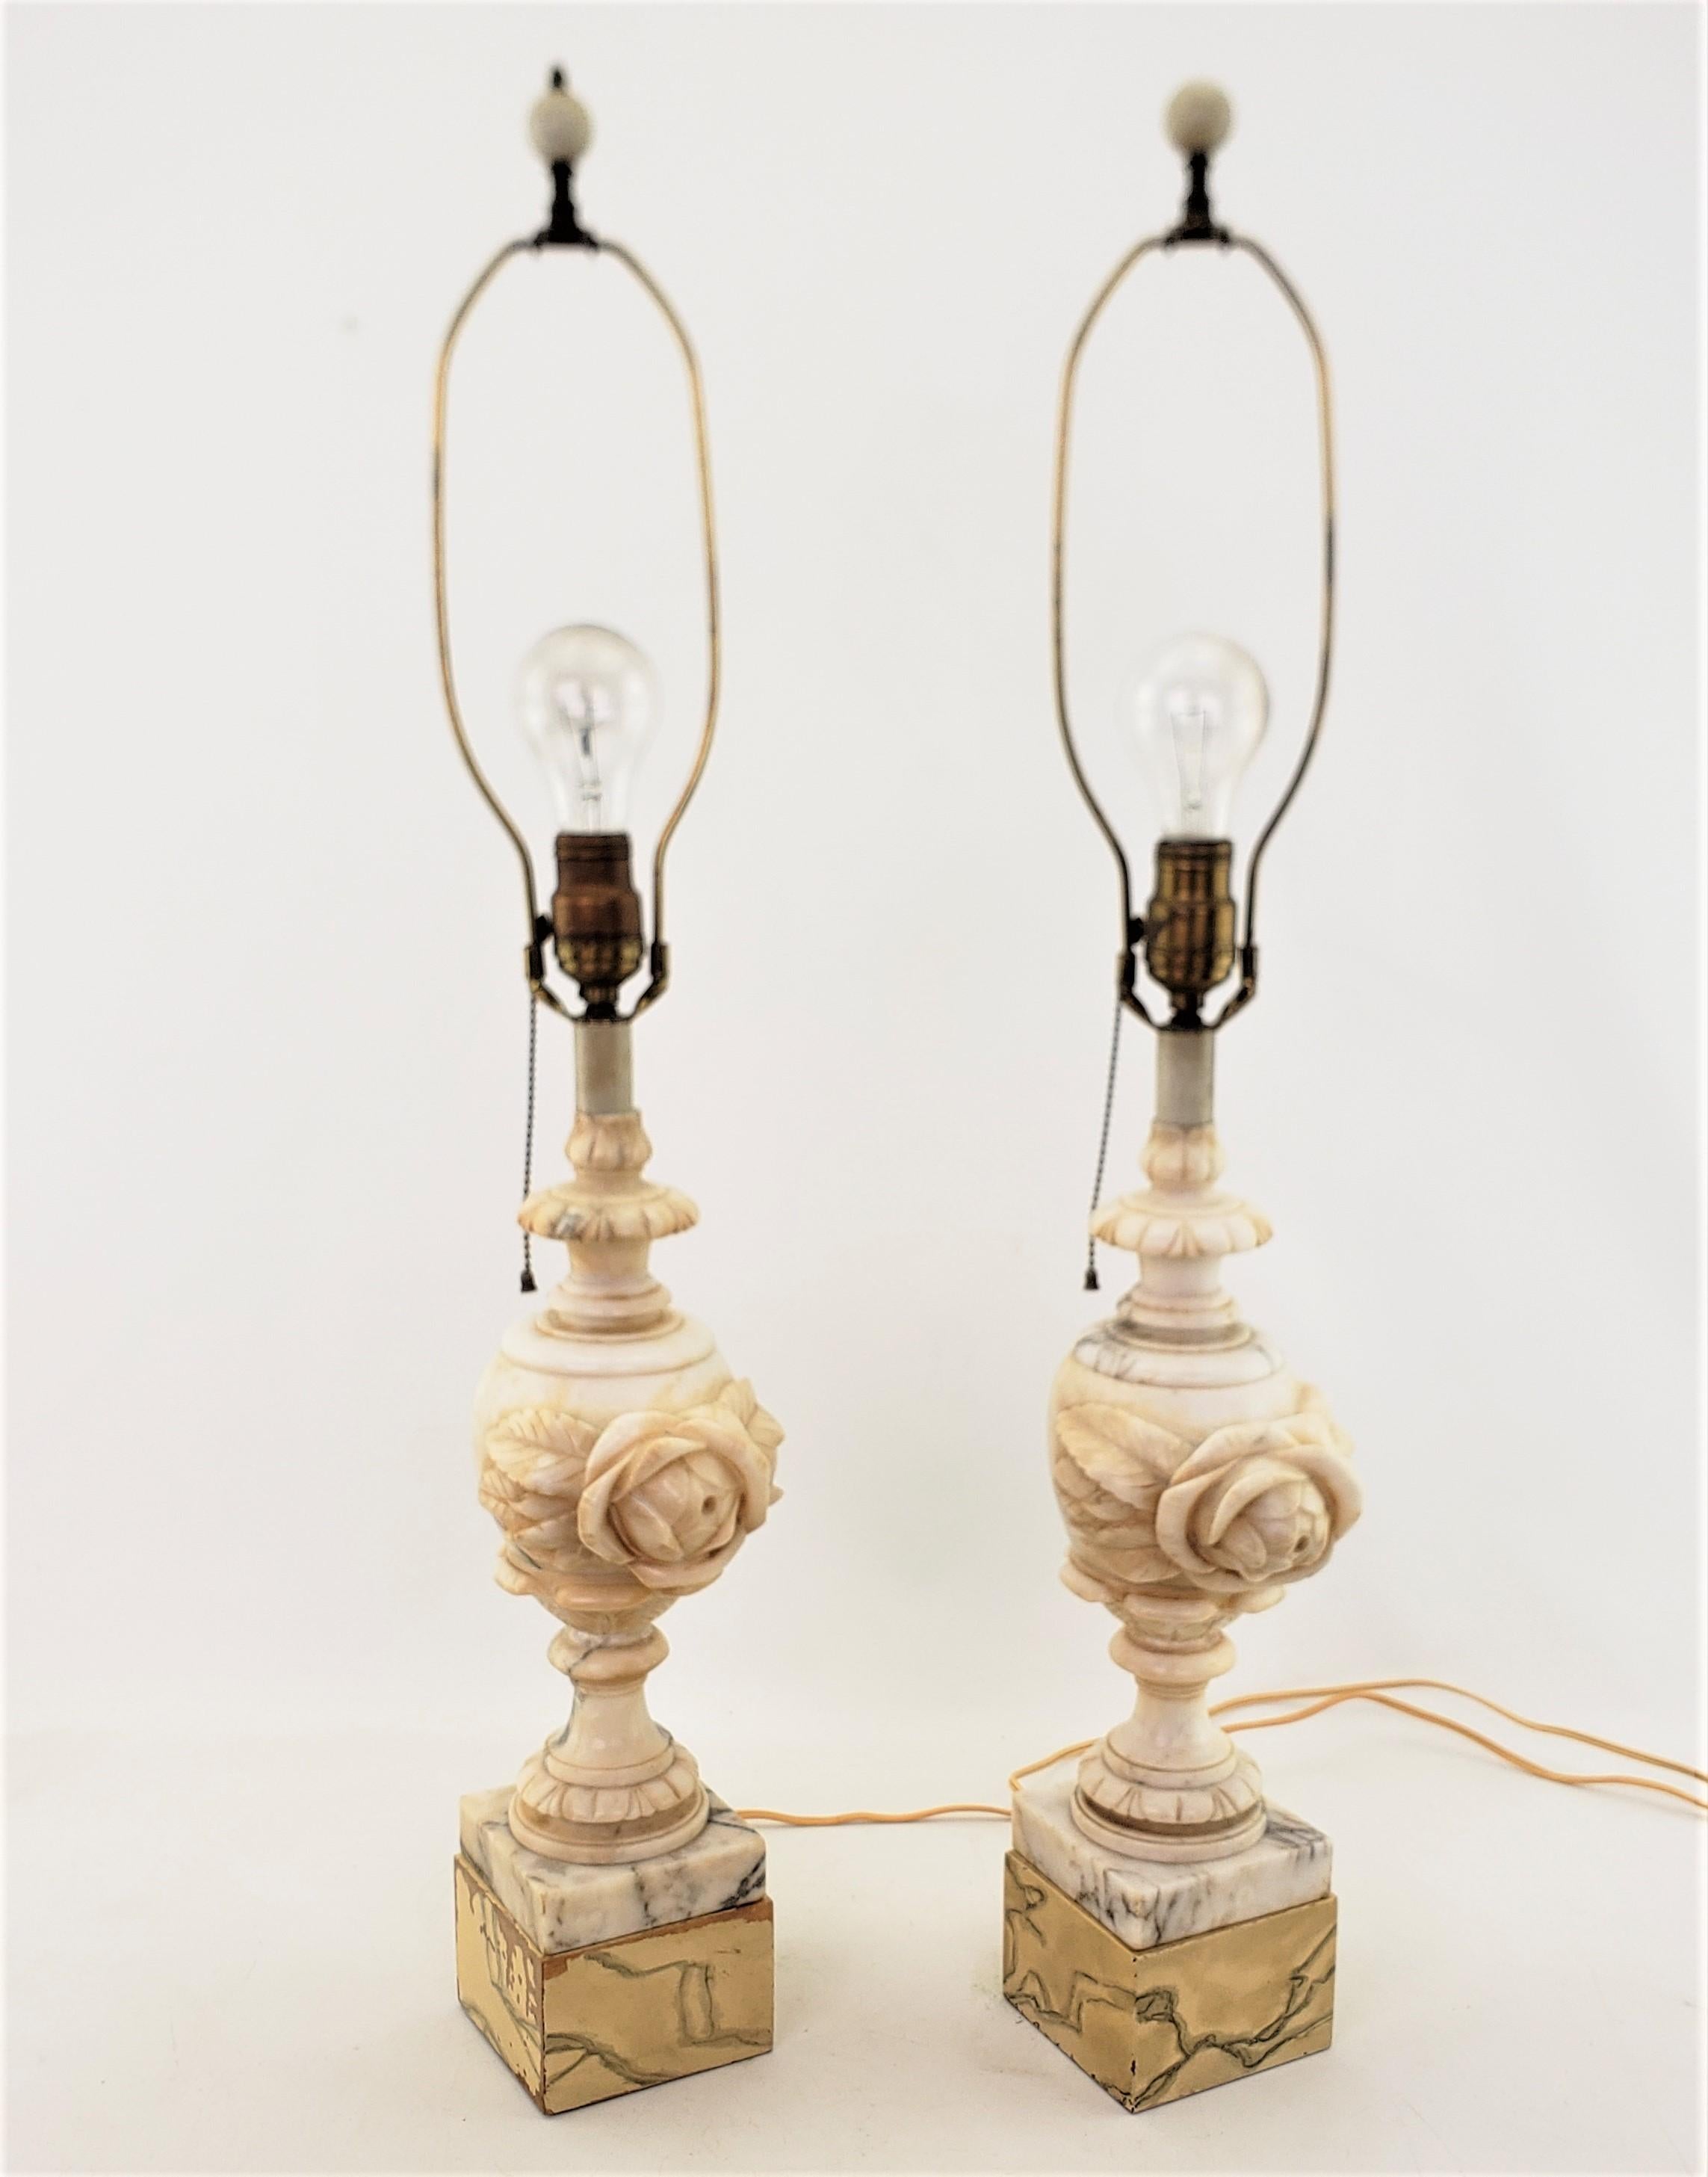 Pair of Antique Neoclassical Styled Urn Shaped Carved Alabaster Table Lamps In Good Condition For Sale In Hamilton, Ontario